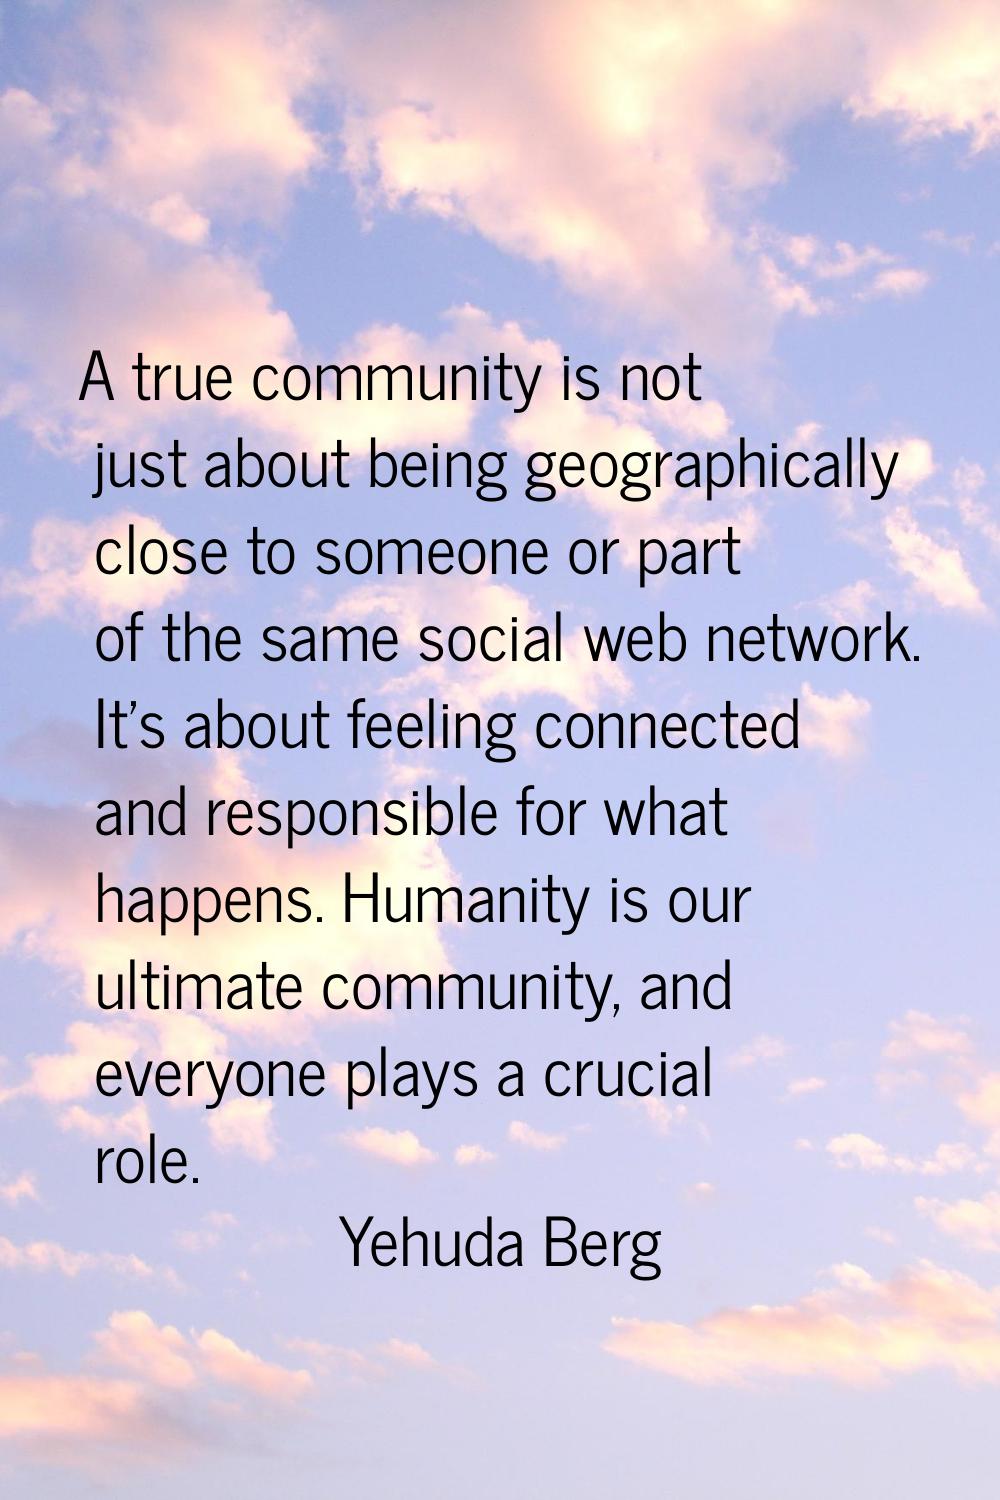 A true community is not just about being geographically close to someone or part of the same social